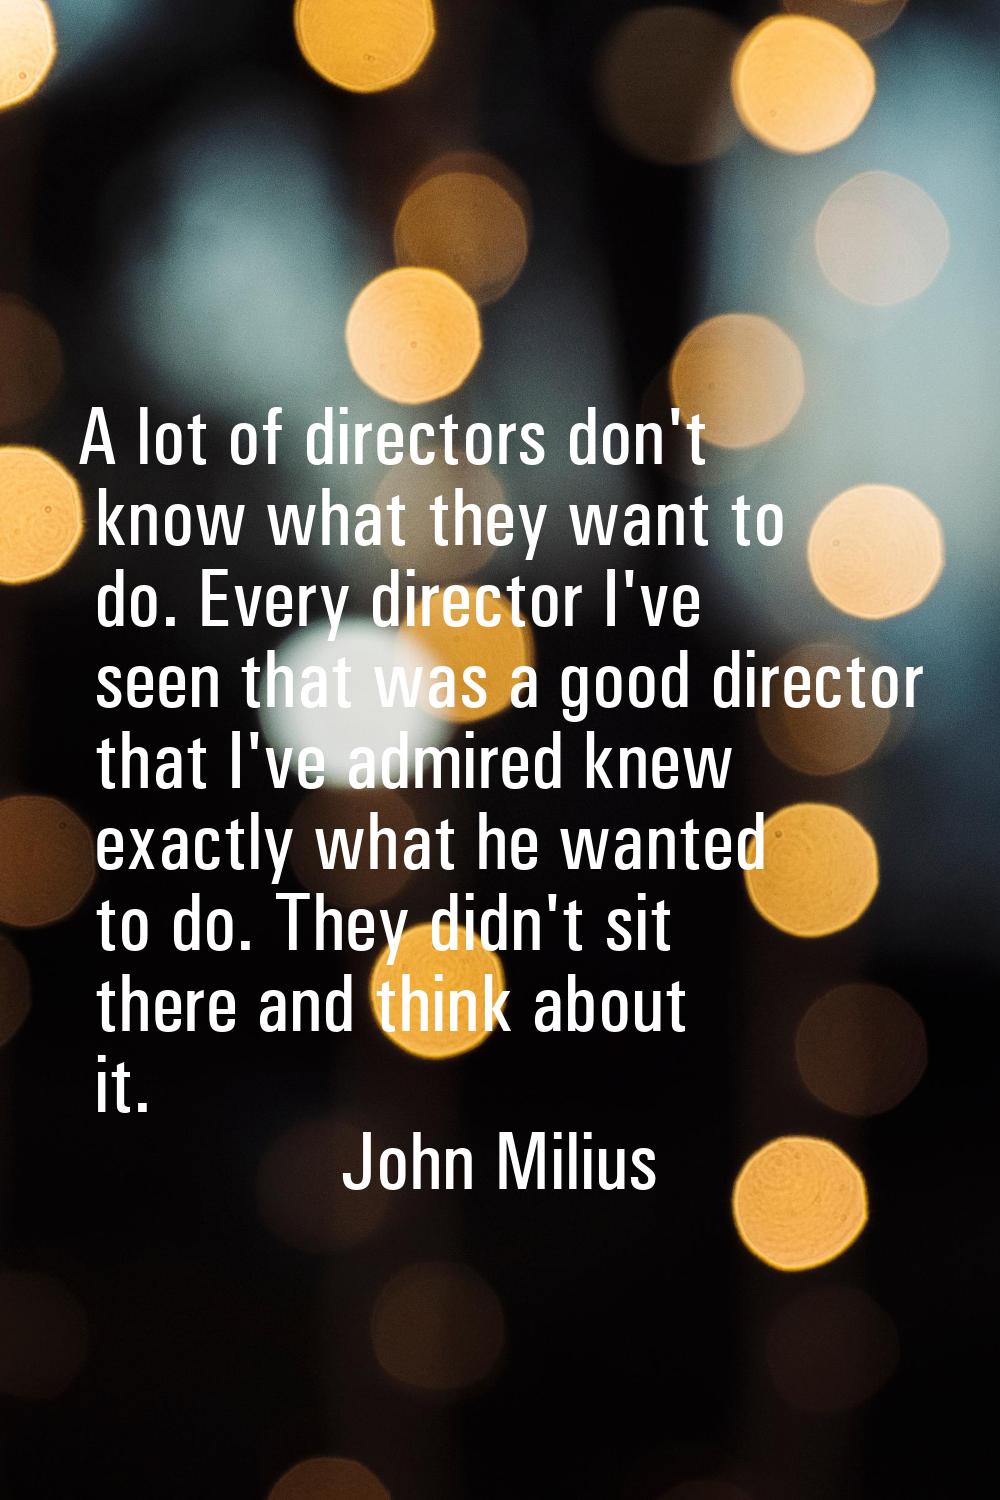 A lot of directors don't know what they want to do. Every director I've seen that was a good direct